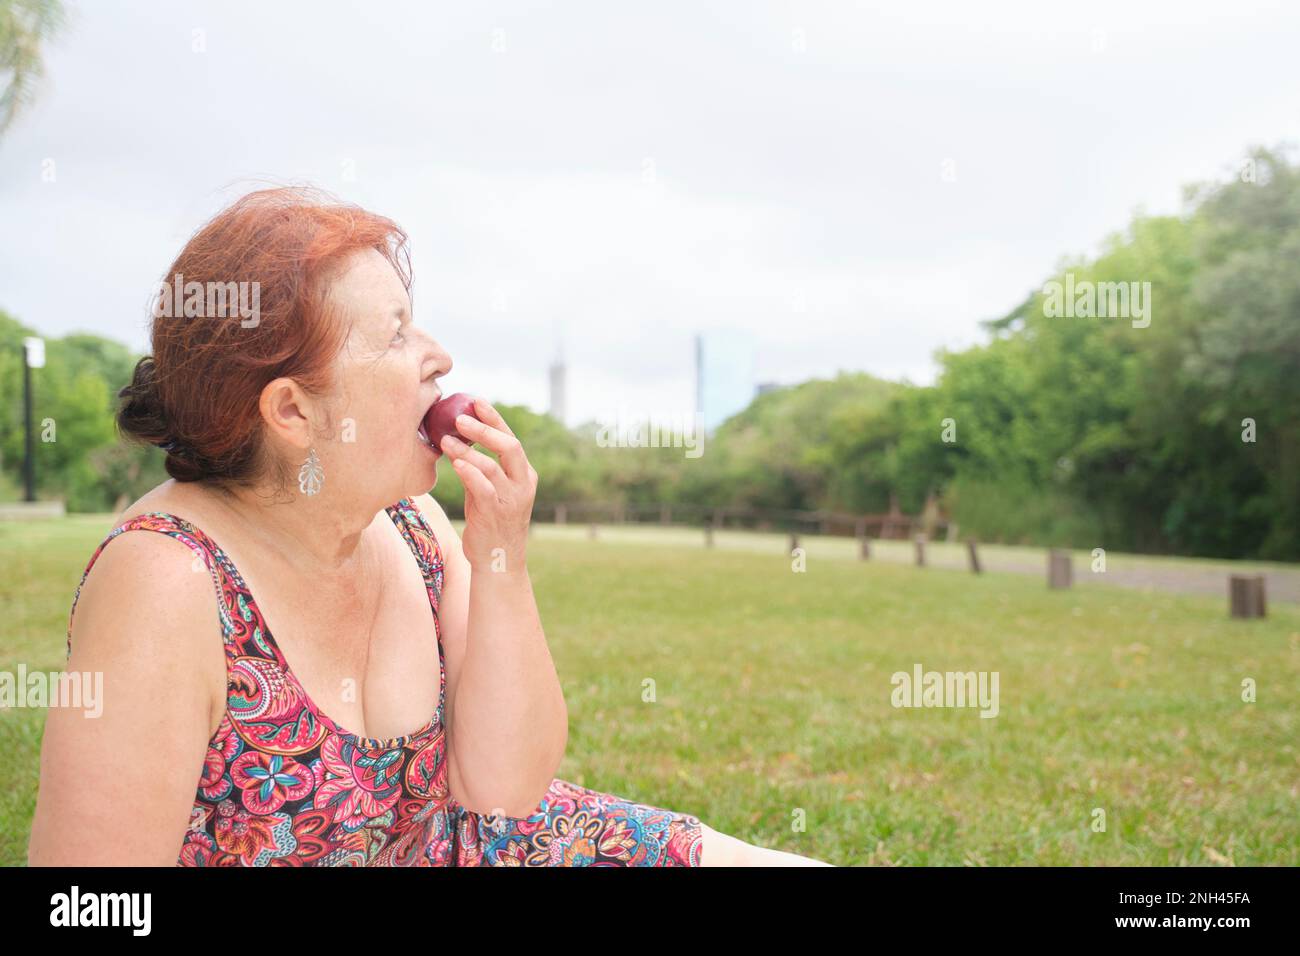 Mature woman eating a plum in a park. Concepts: healthy lifestyle, enjoying the outdoors. Image with copy space. Stock Photo